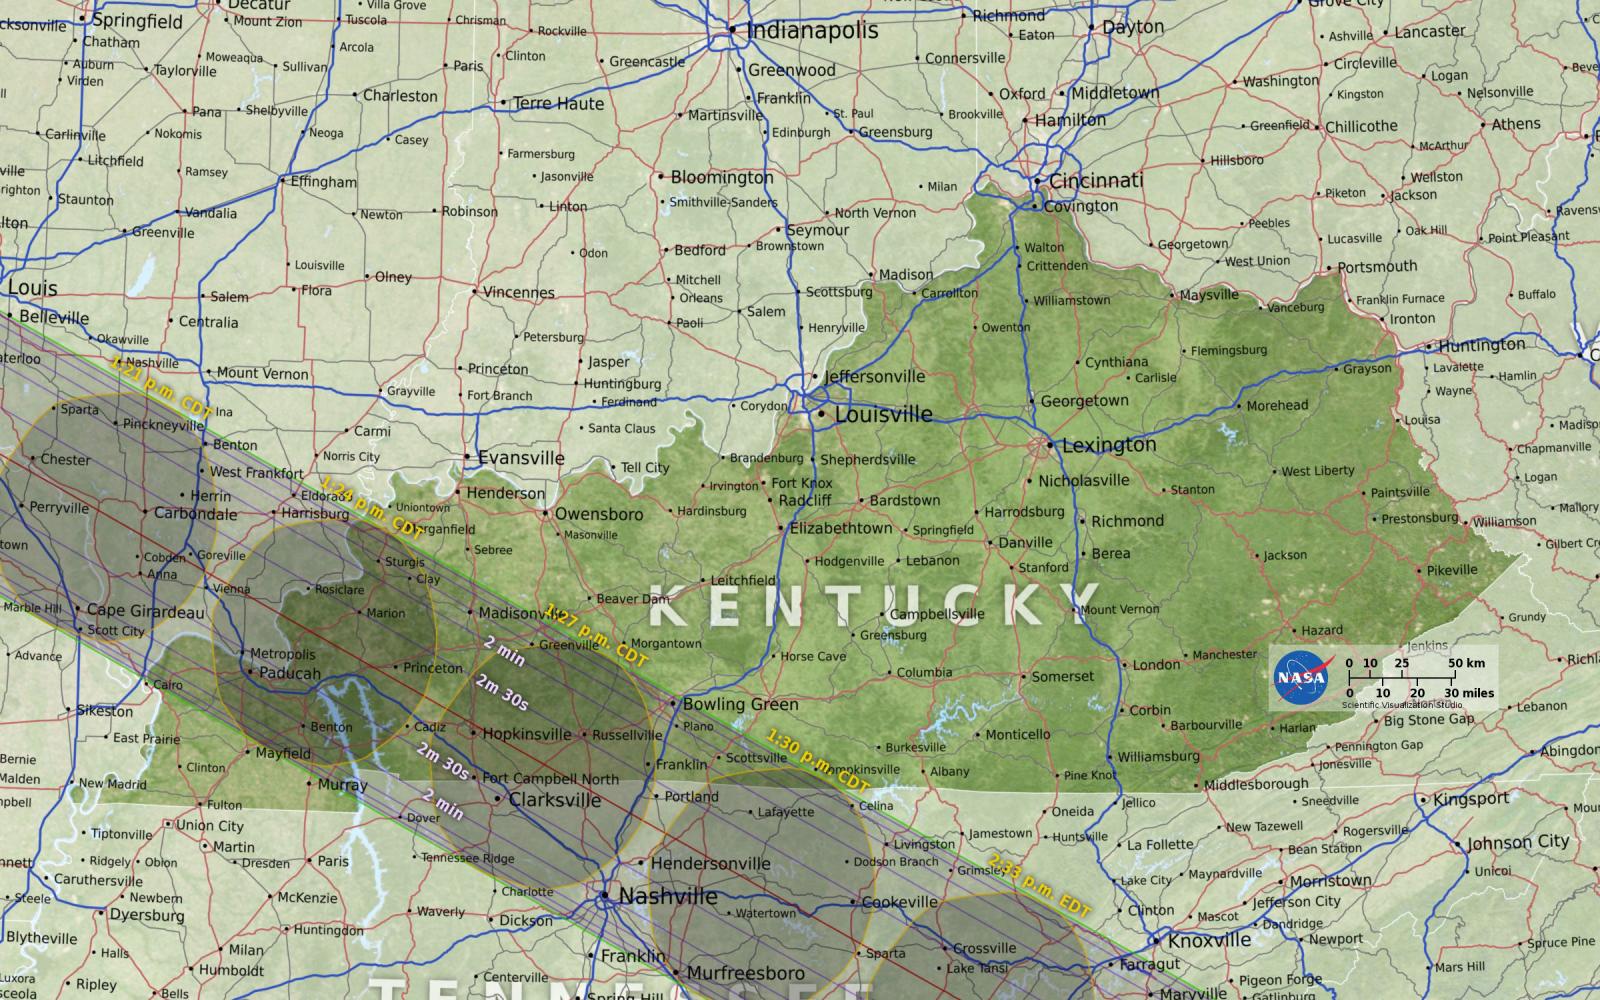 KY Path of Totality